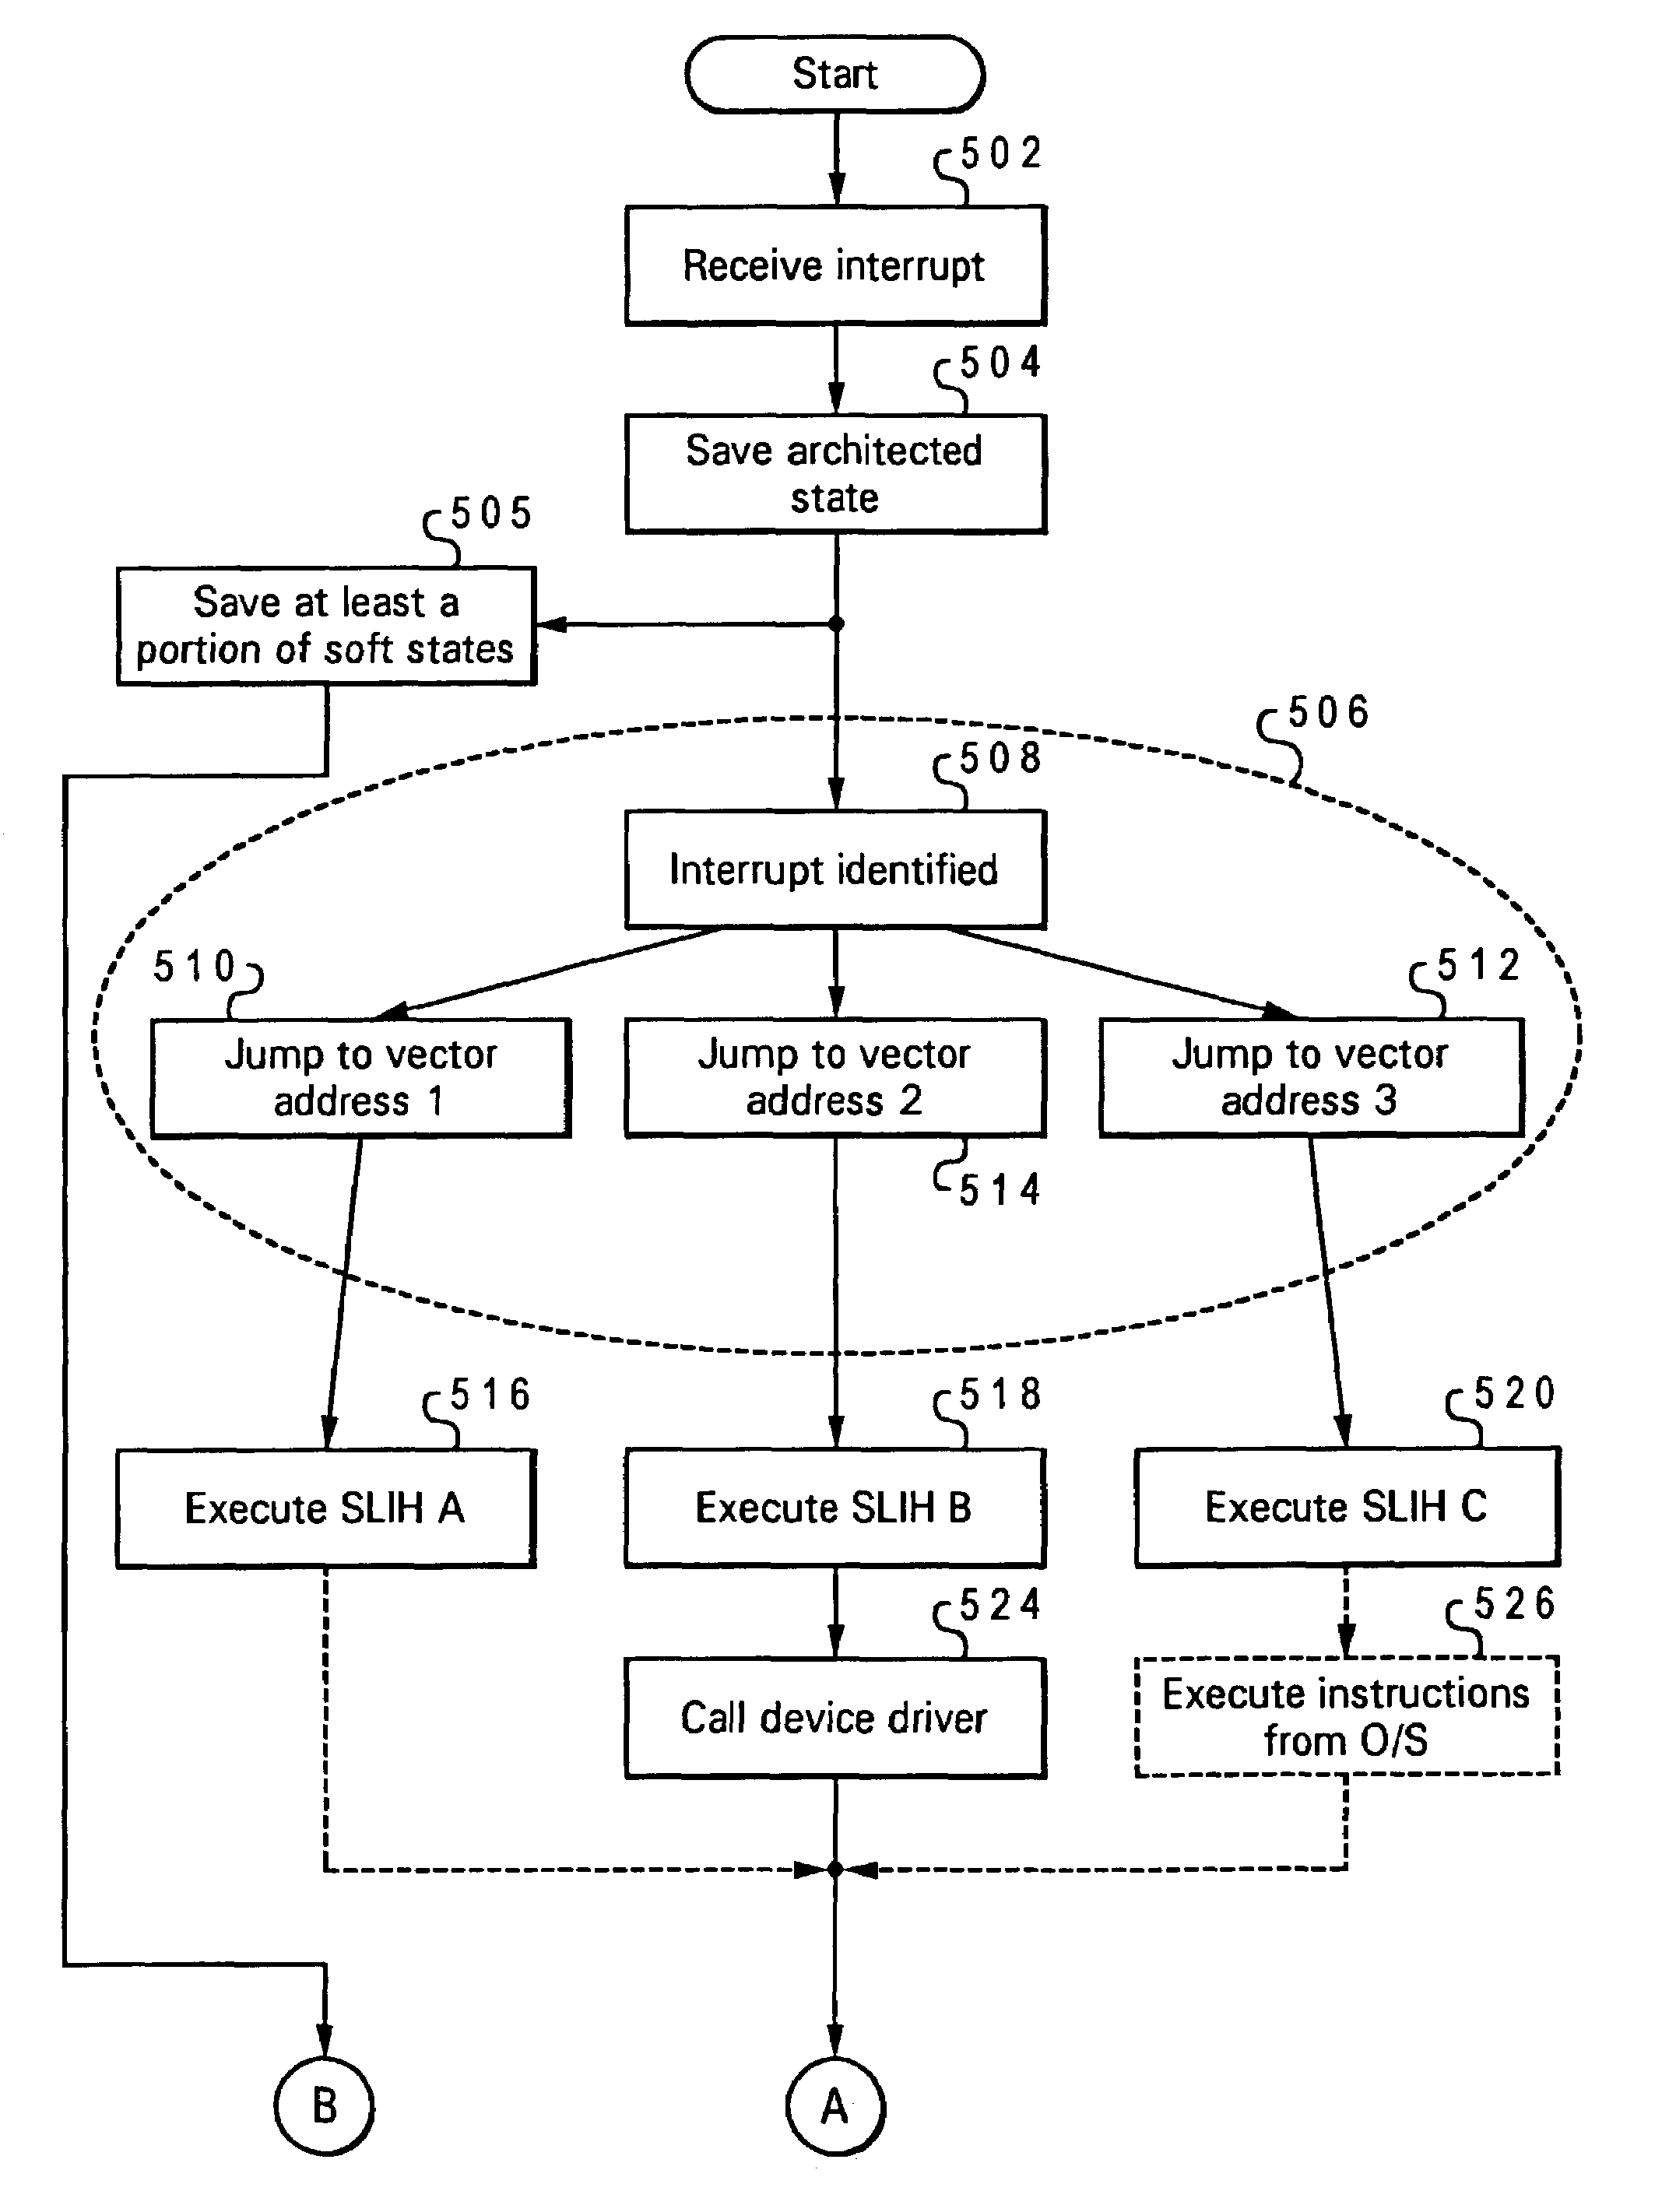 Cross partition sharing of state information